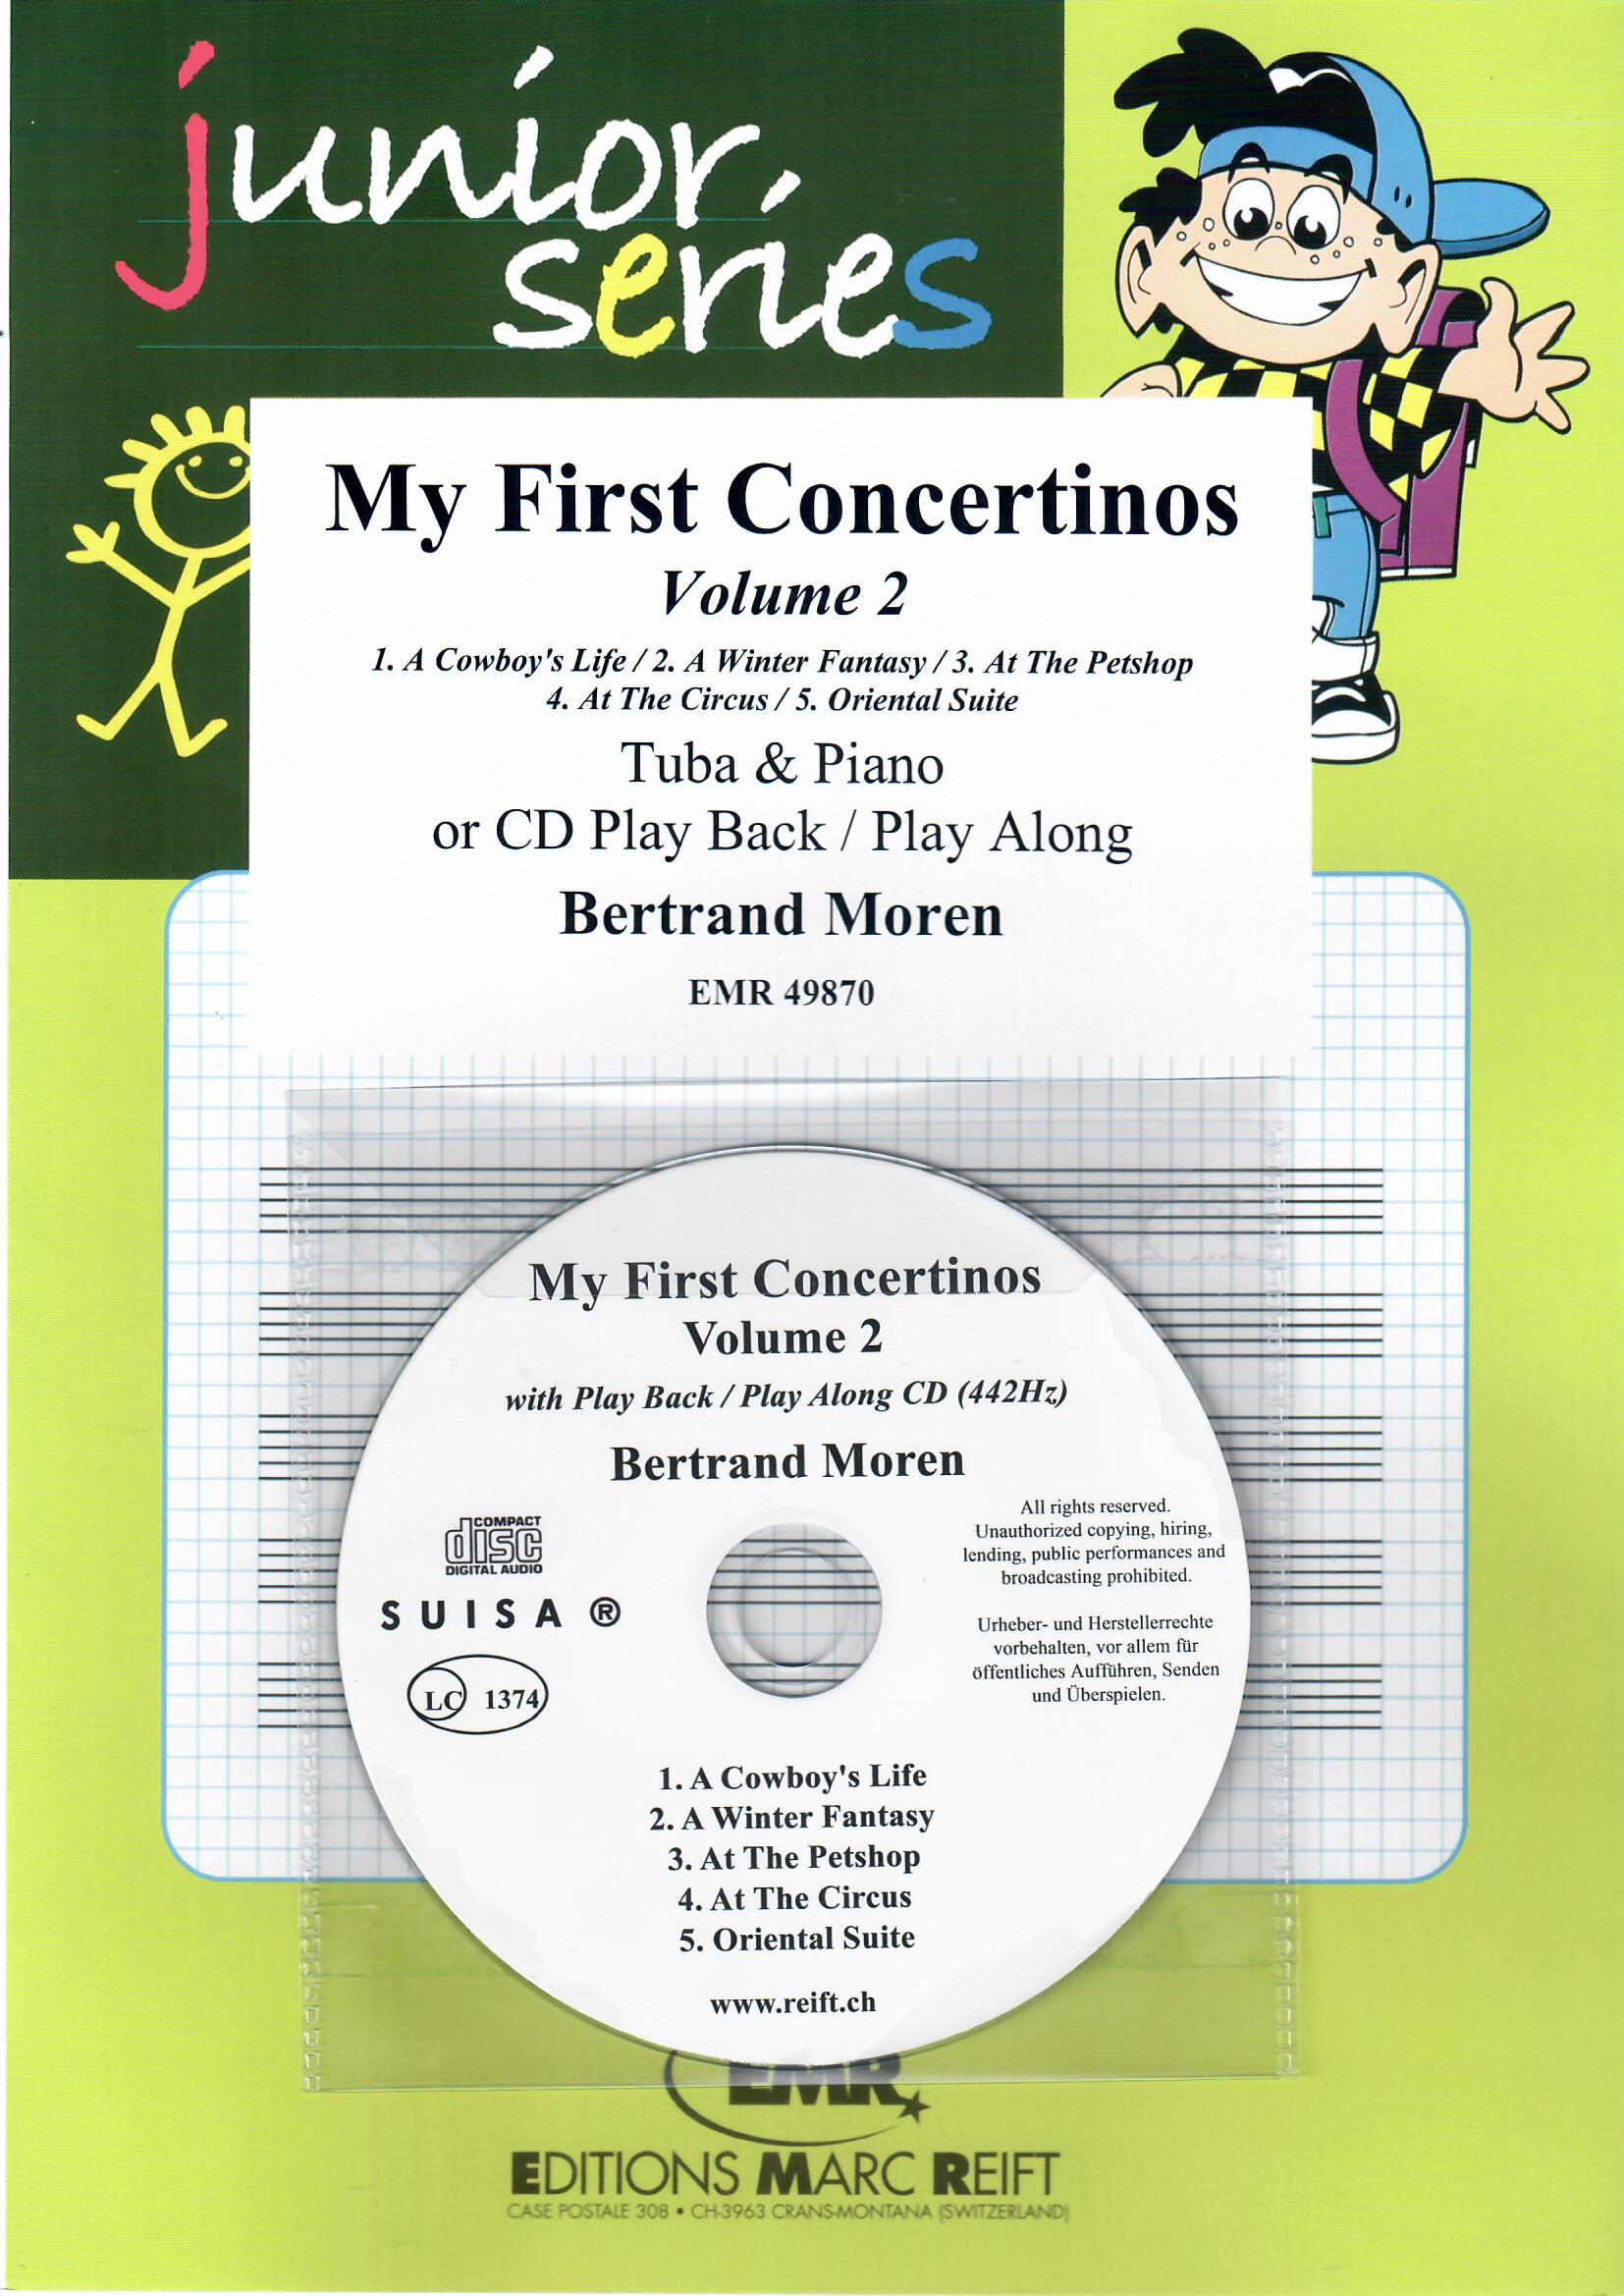 MY FIRST CONCERTINOS VOLUME 2 - Tuba & Piano